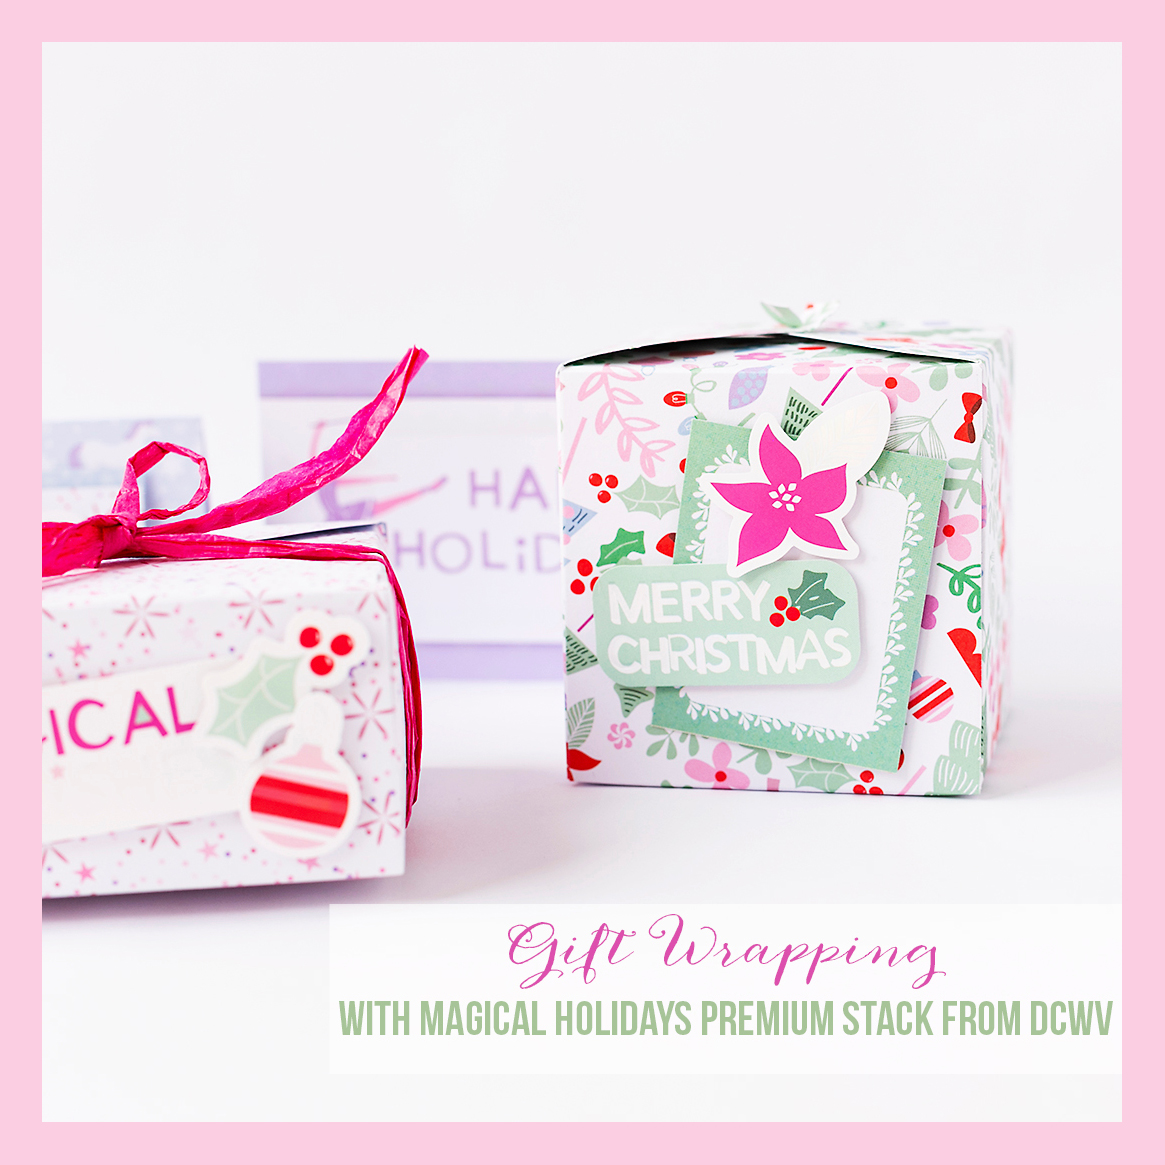 Xmas Gift Boxes with Magical Holidays Premium Stack @SandraDietrich for @DCWV